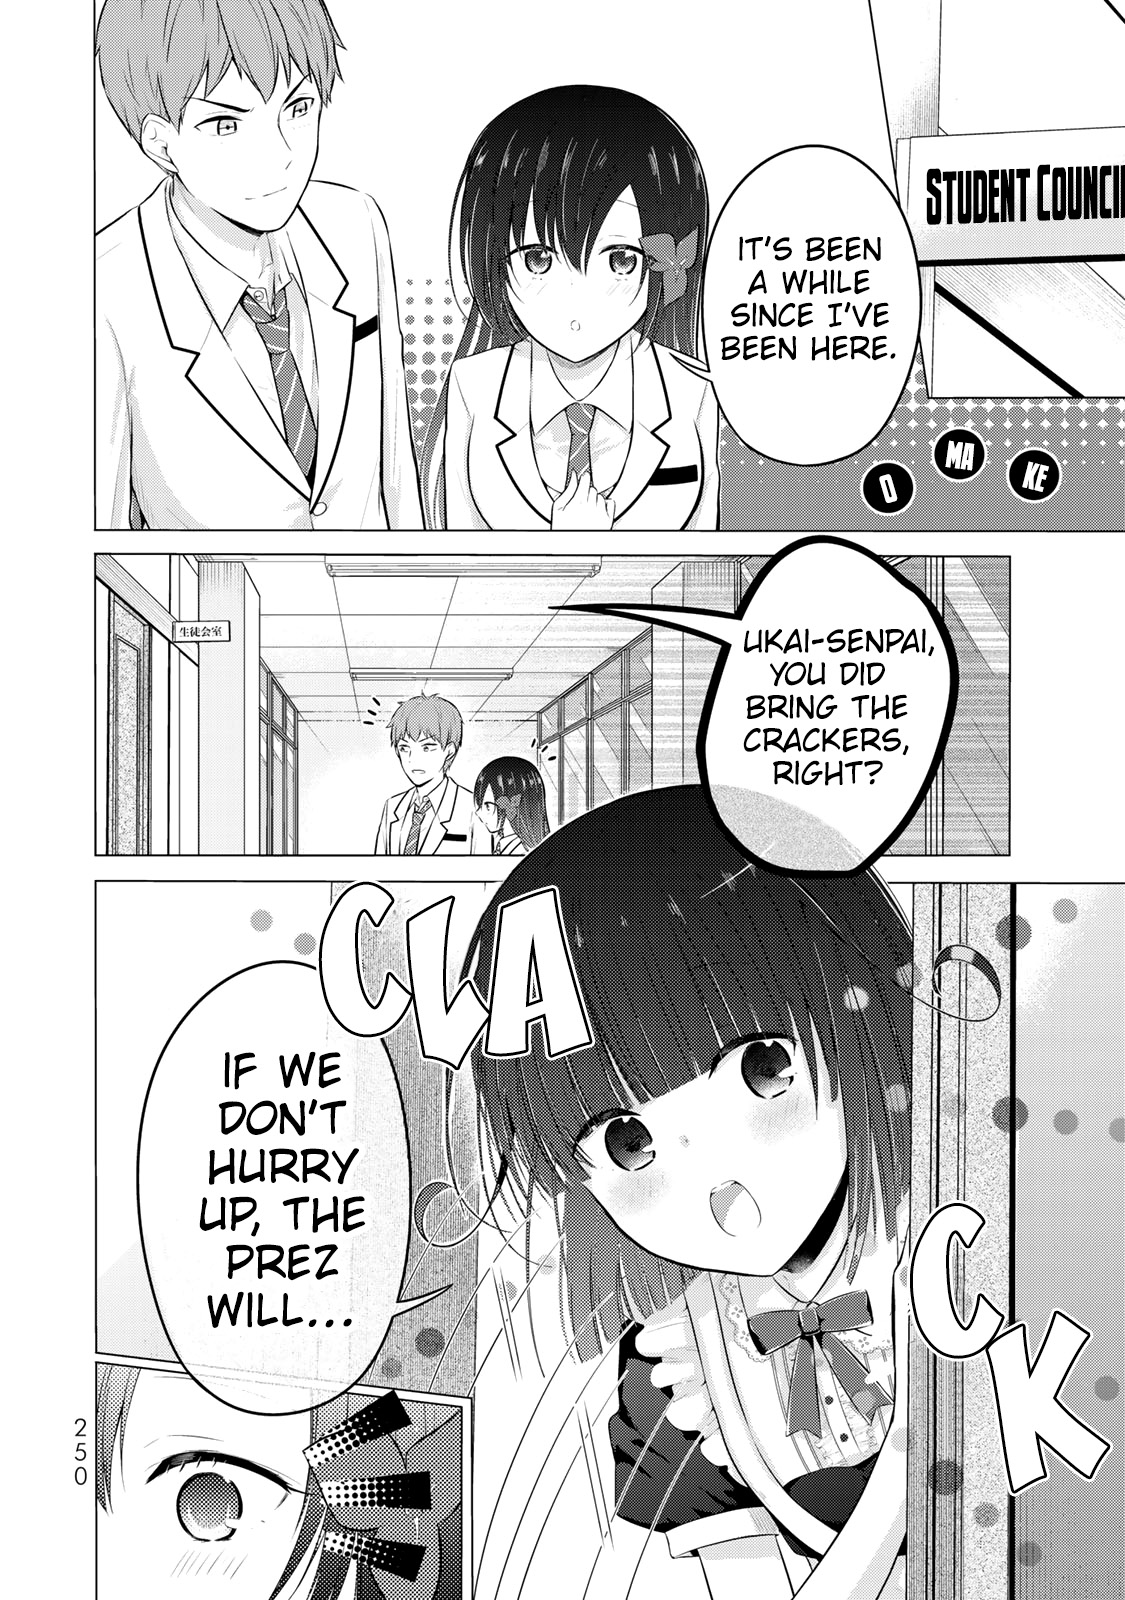 The Student Council President Solves Everything On The Bed Vol.3 Chapter 14.5: Vol. 3 Omake - Picture 2